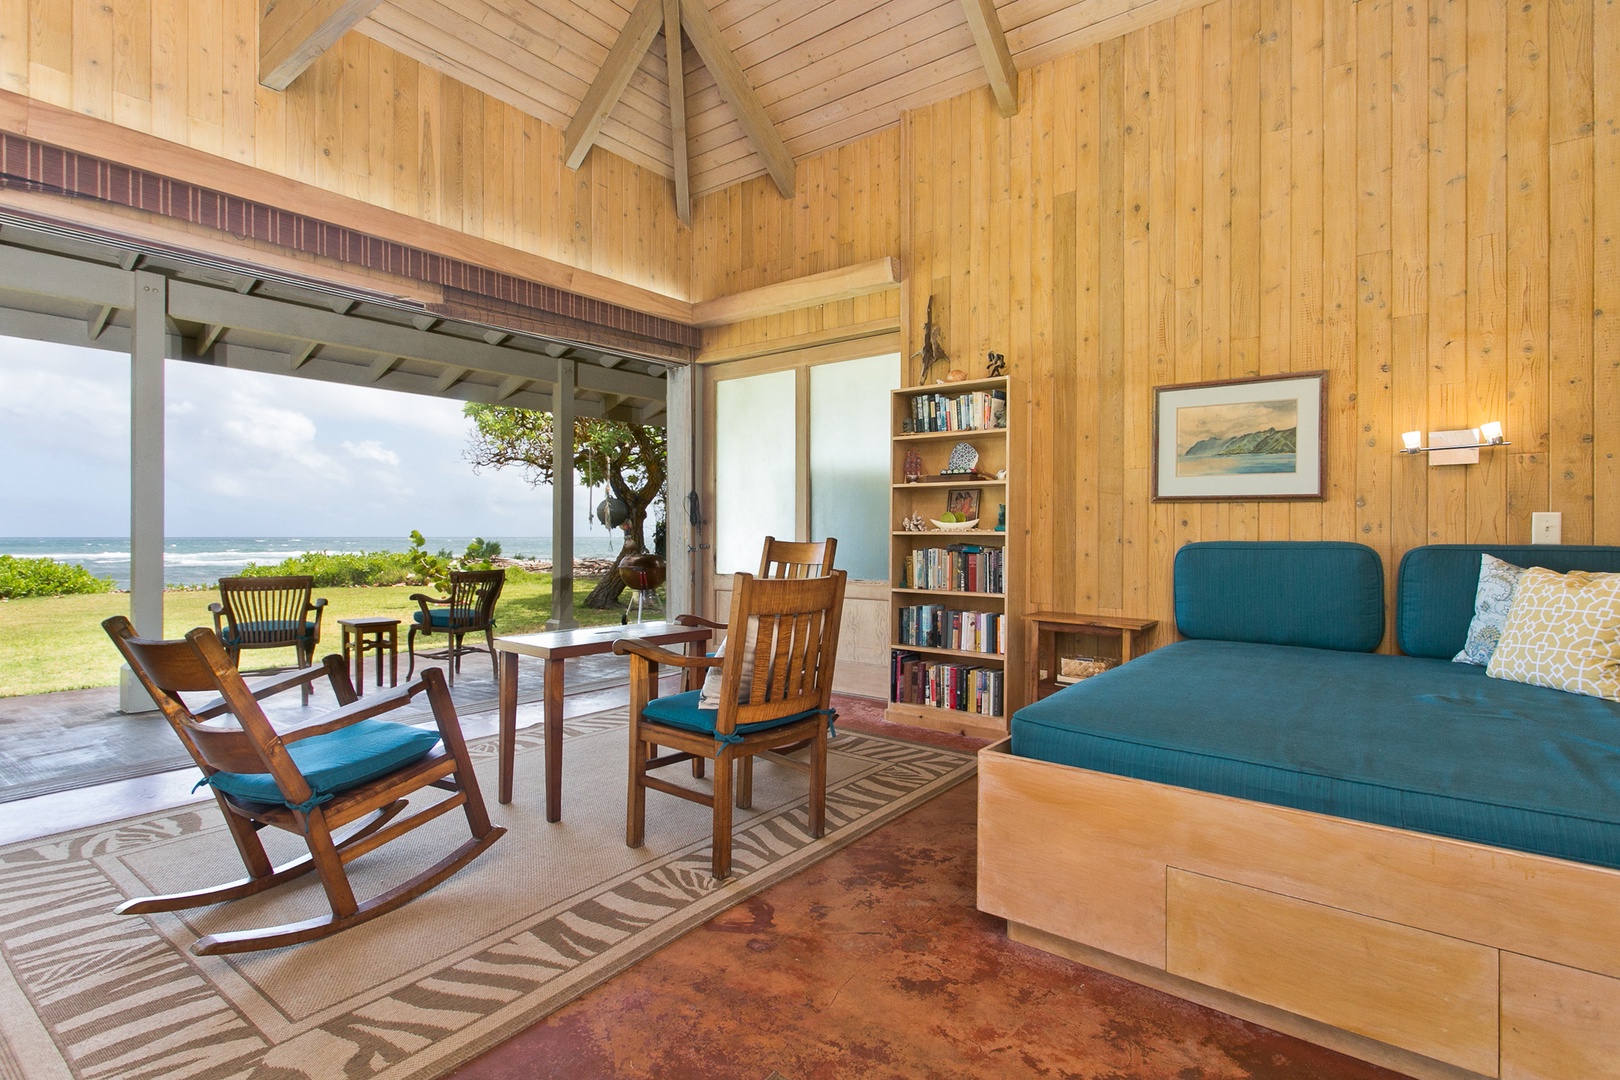 Laie Vacation Rentals, Waipuna Hale - Relax with panoramic ocean views.